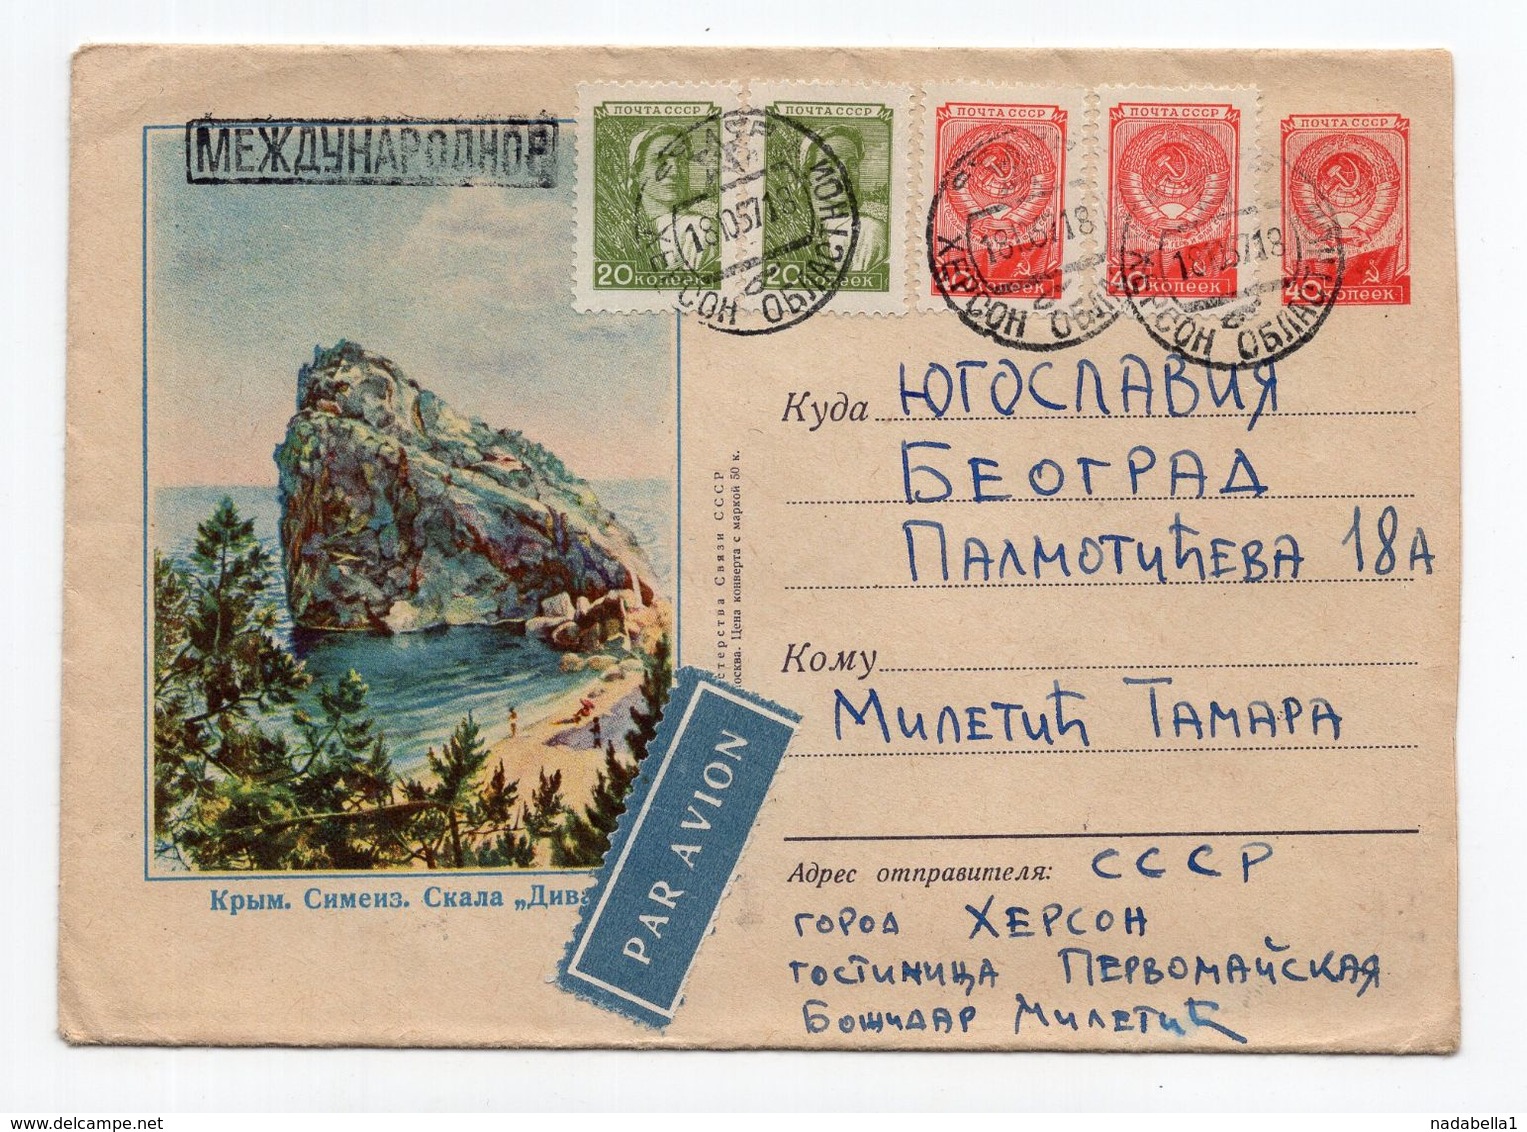 1957 RUSSIA,HERSON TO BELGRADE,YUGOSLAVIA,AIRMAIL,CRIMEA DIVA ROCK,ILLUSTRATED STATIONERY COVER,USED - Lettres & Documents